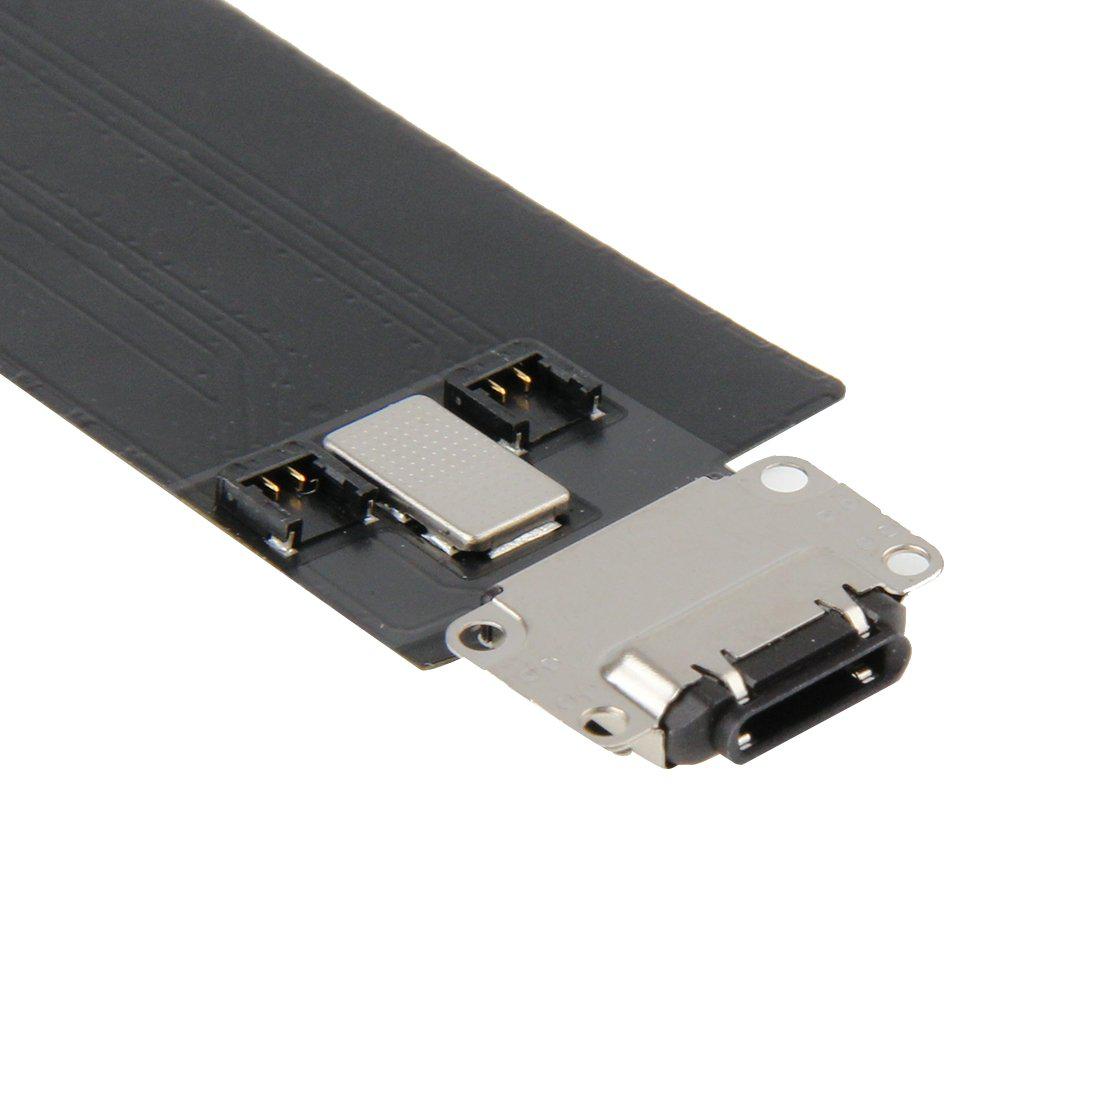 Apple iPad Pro 12.9" Charging Port Connector Flex Cable - Black for [product_price] - First Help Tech